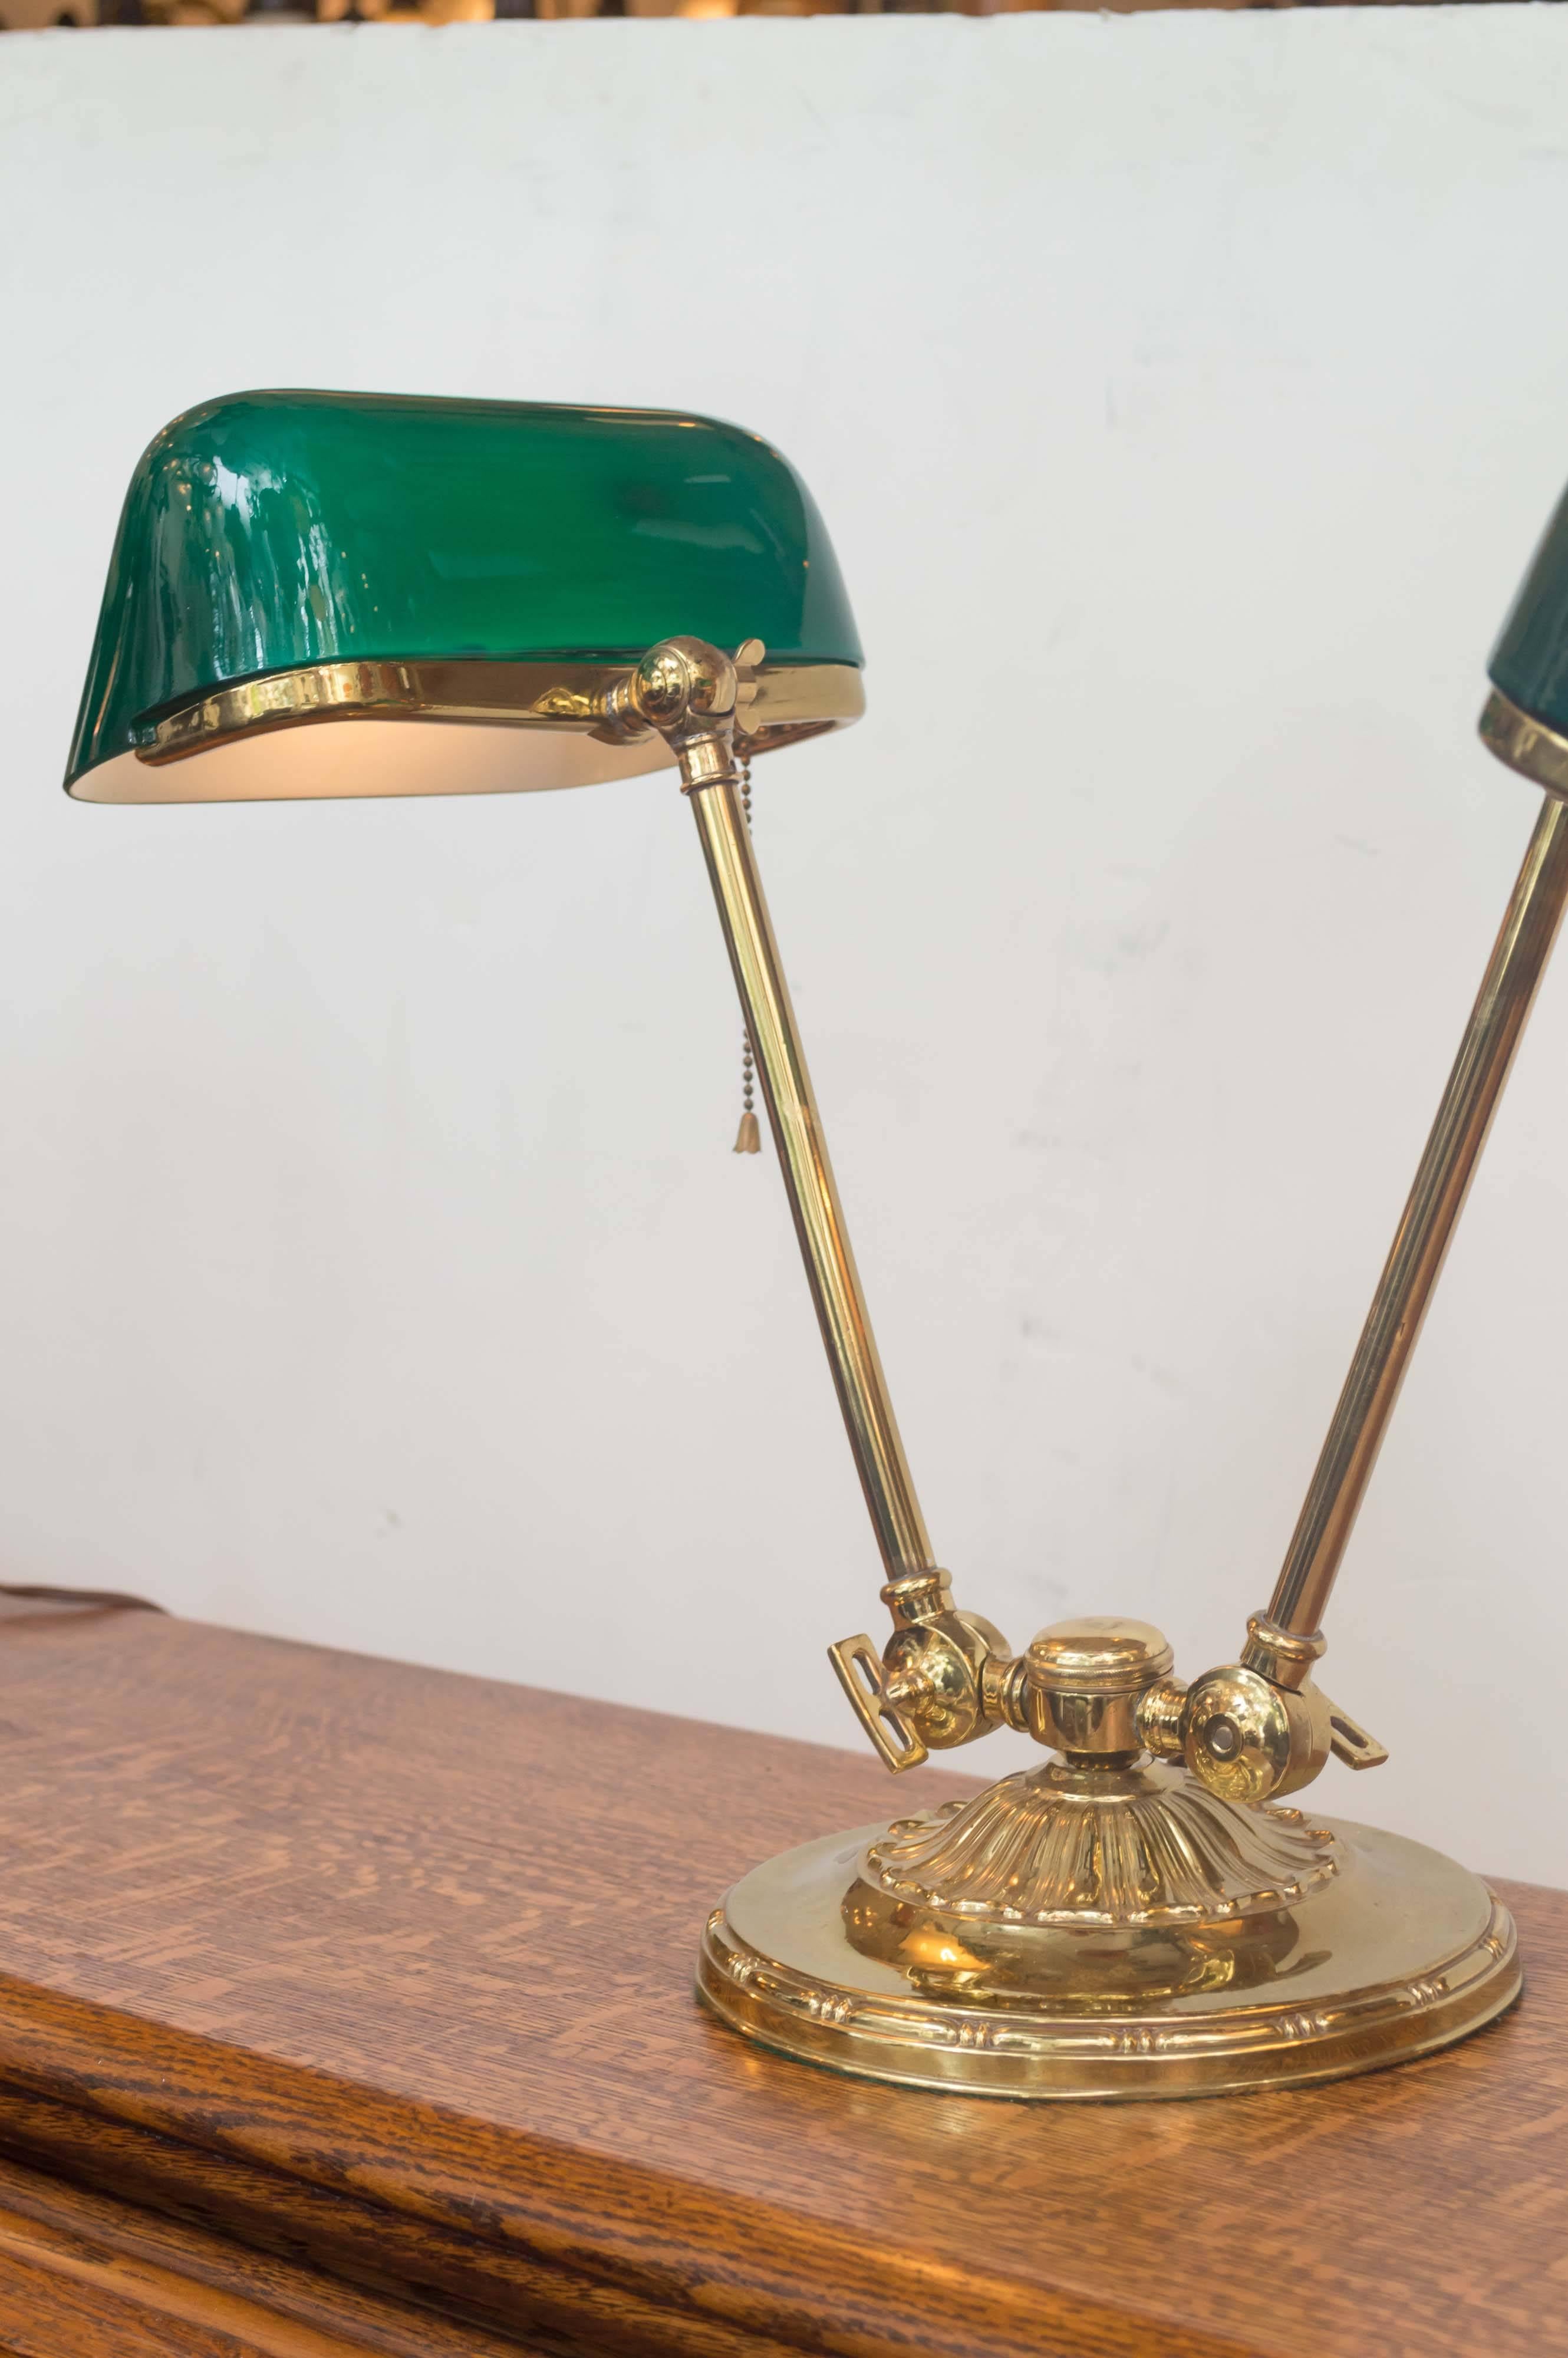 This exceptionally rare model was produced by the most famous maker of these desk lamps known as 